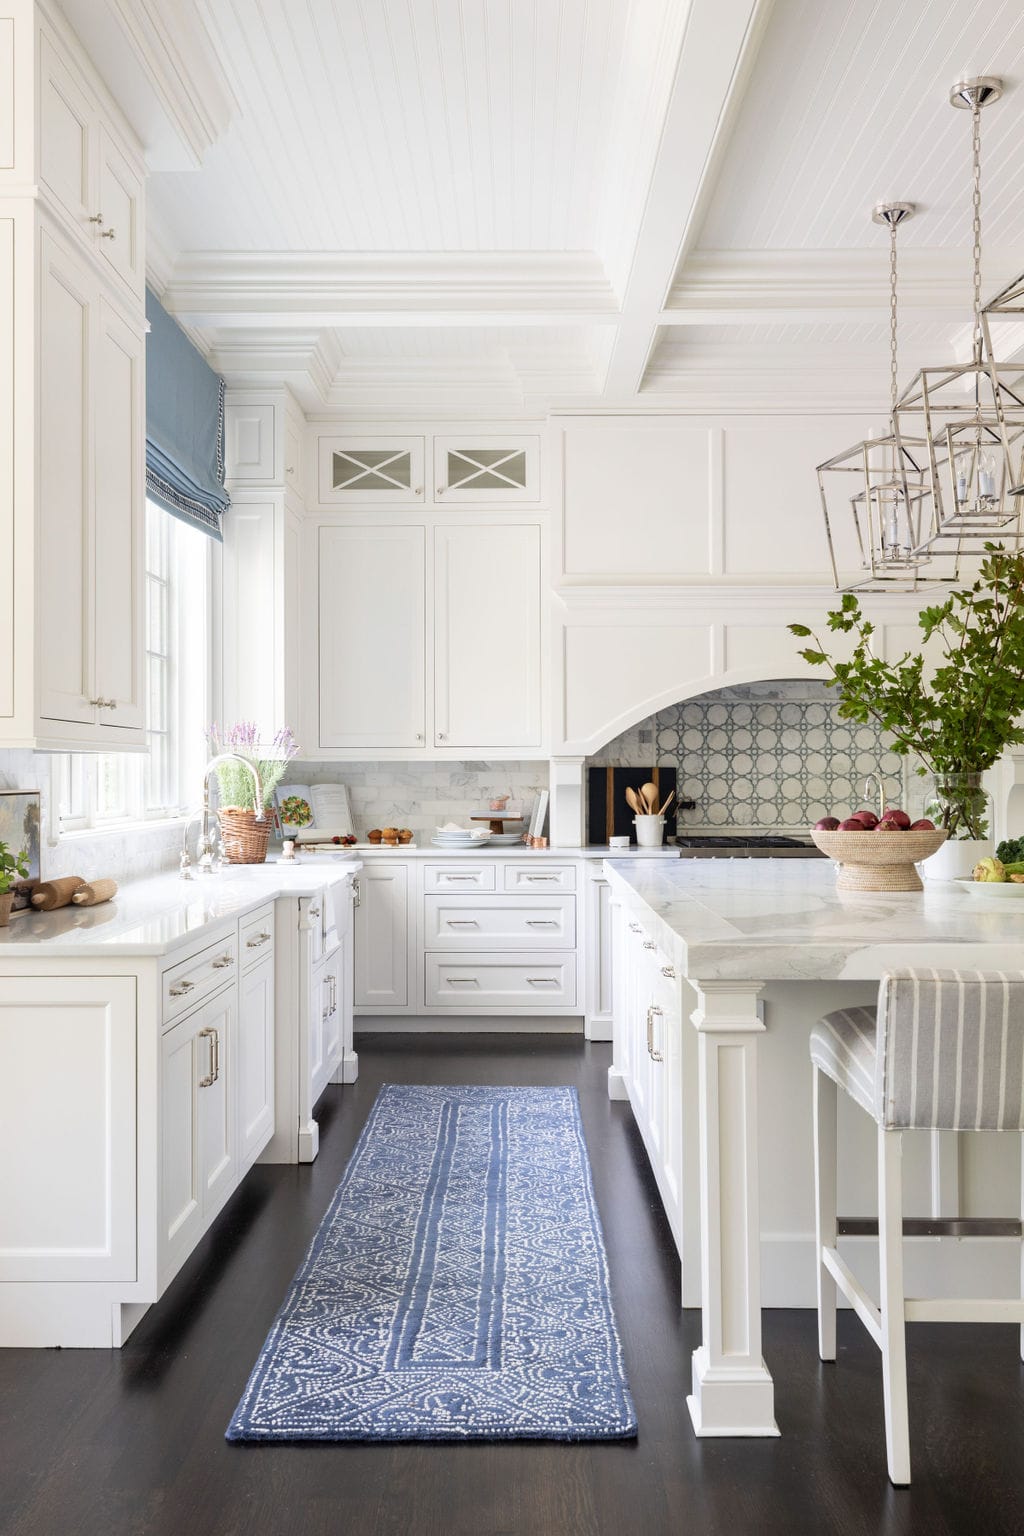 White kitchen cabinetry with blue and white home decor accents in window treatments, runner and barstools